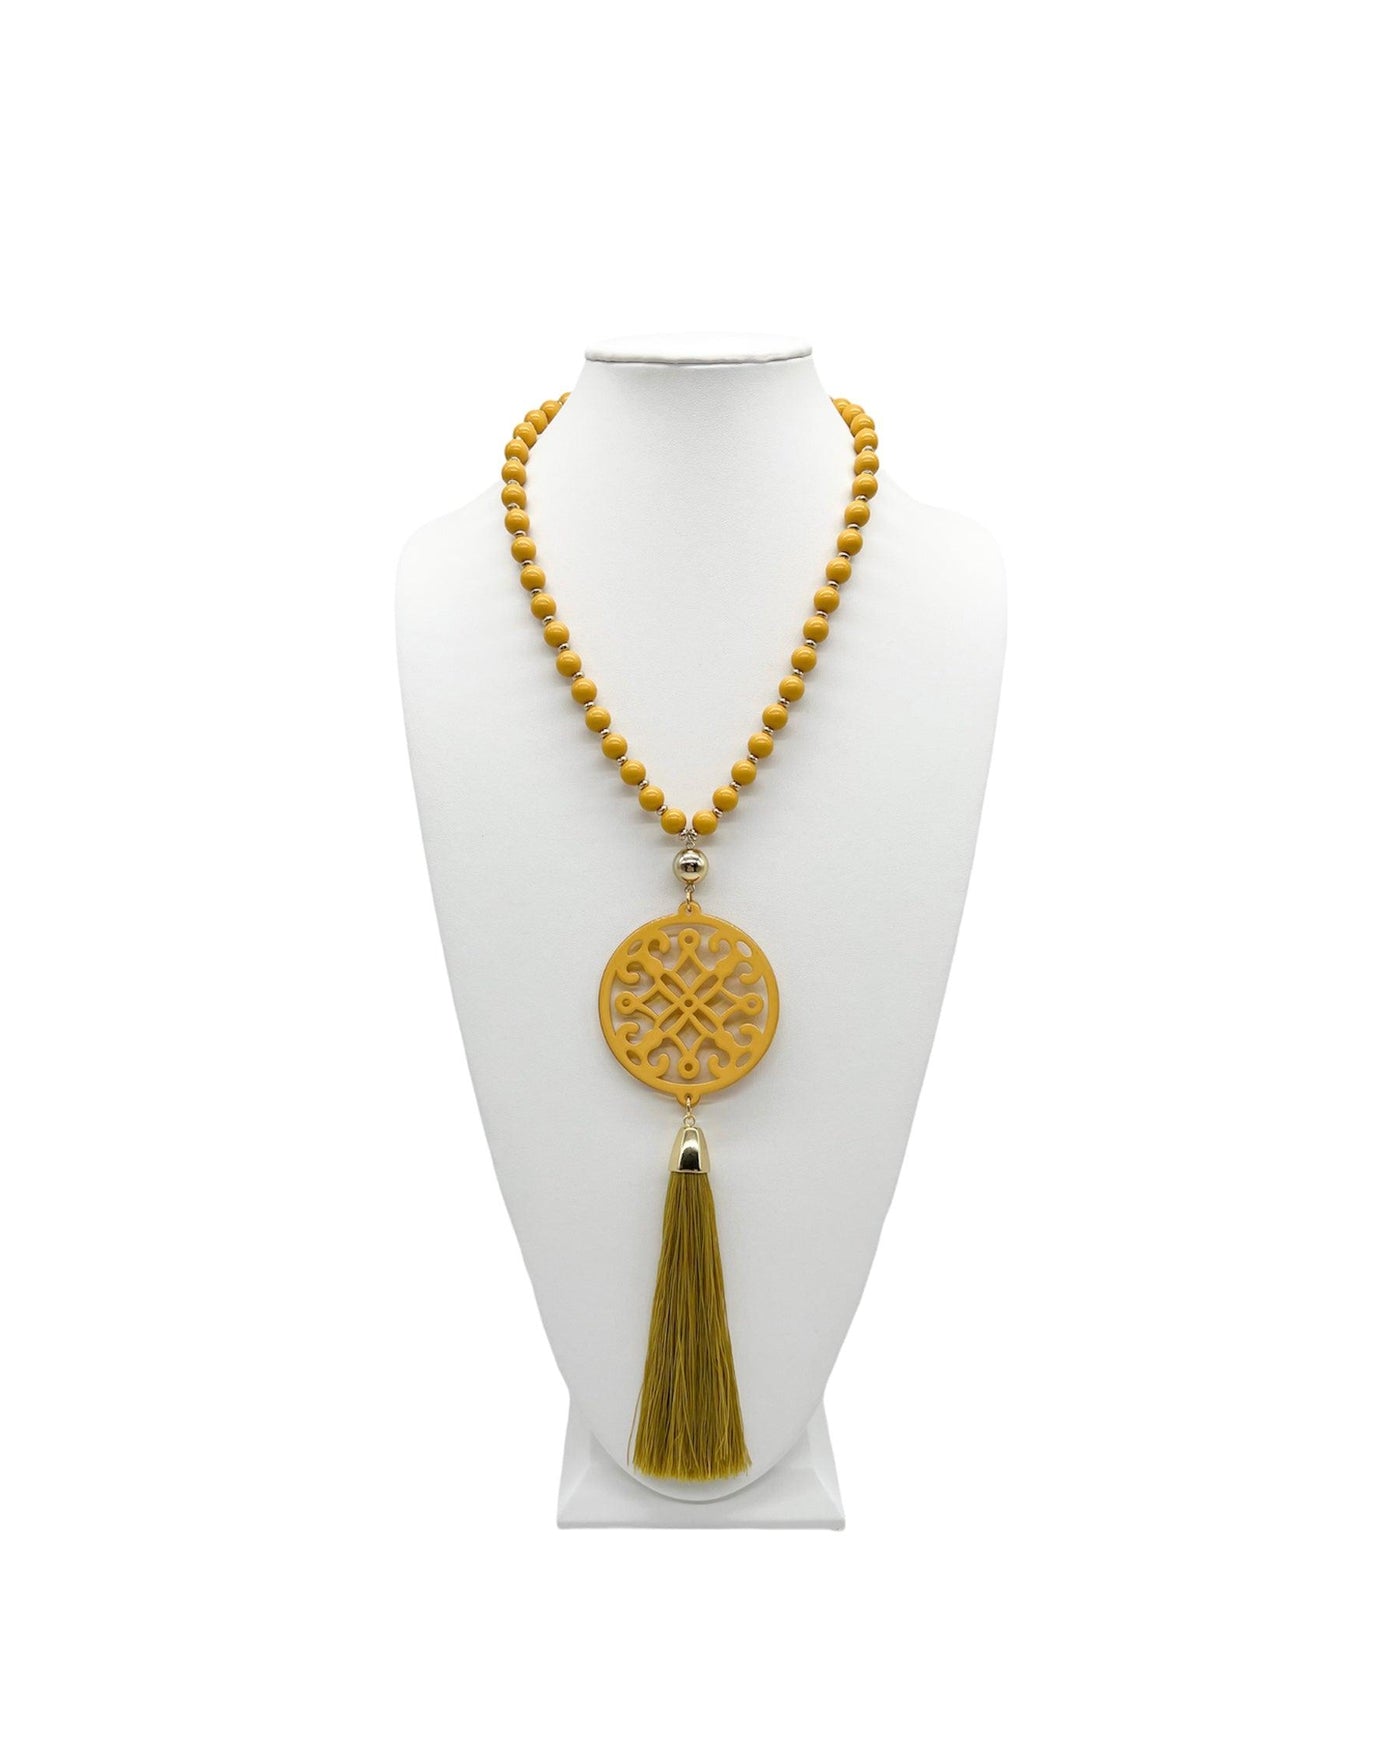 Honey yellow ornate resin pendant on a beaded chain with a rassel